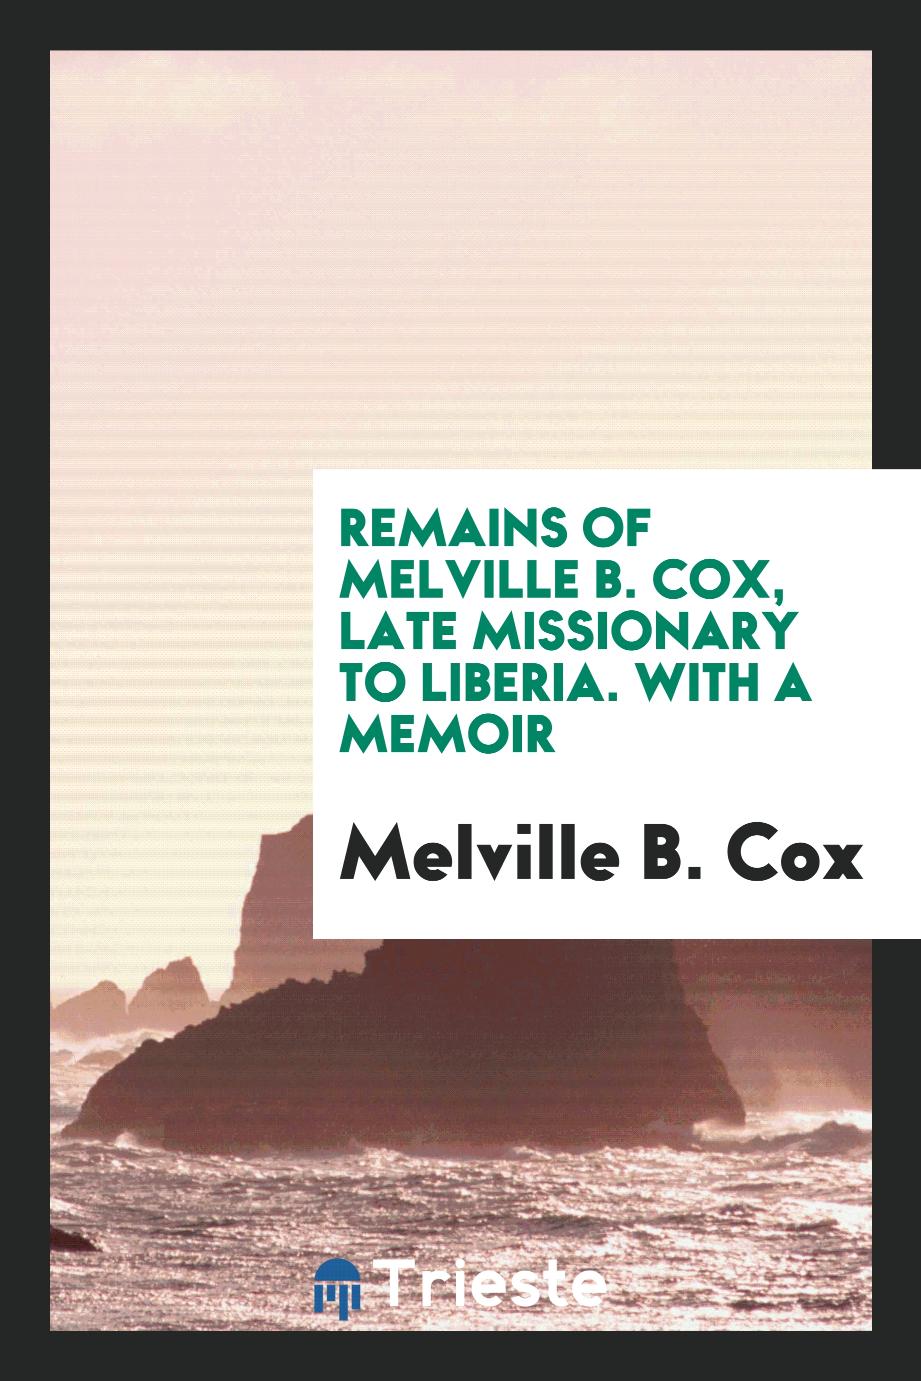 Remains of Melville B. Cox, late missionary to Liberia. With a memoir